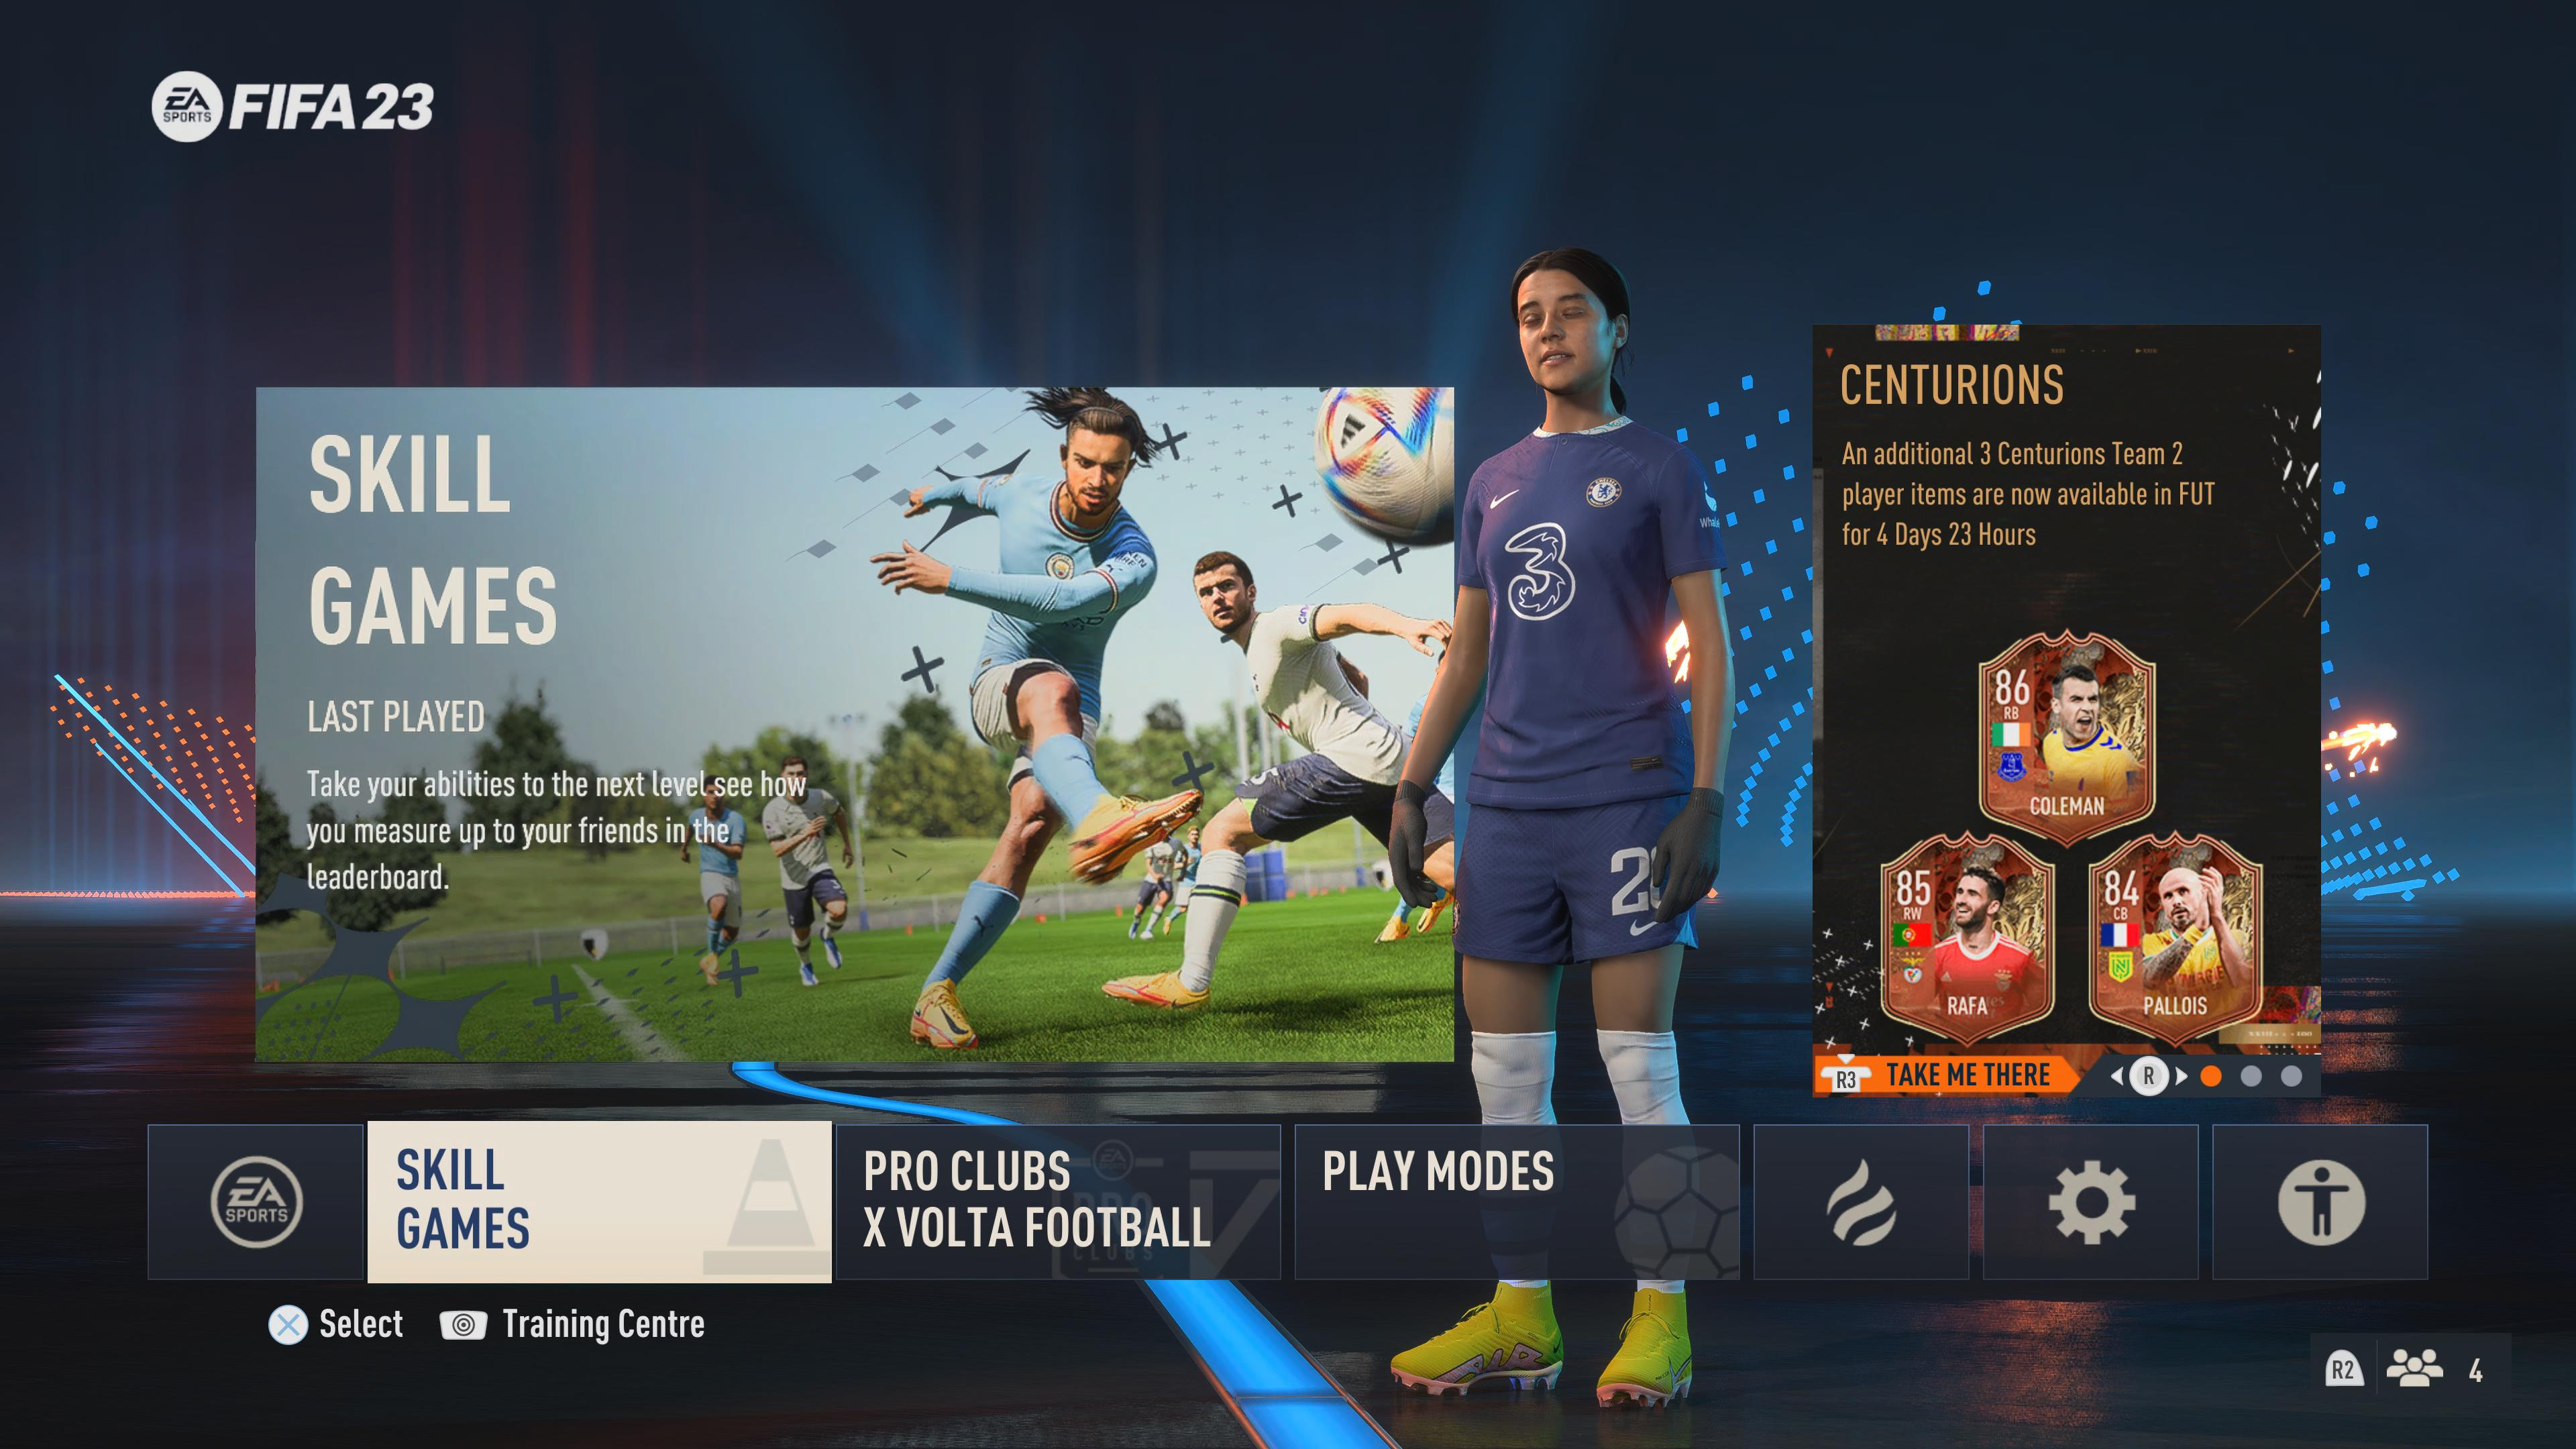 NEW* HOW TO GET FIFA 23 FOR FREE! HOW TO GET FIFA 23 100% FREE (WORKING  PLAYSTATION 5 & XBOX) 